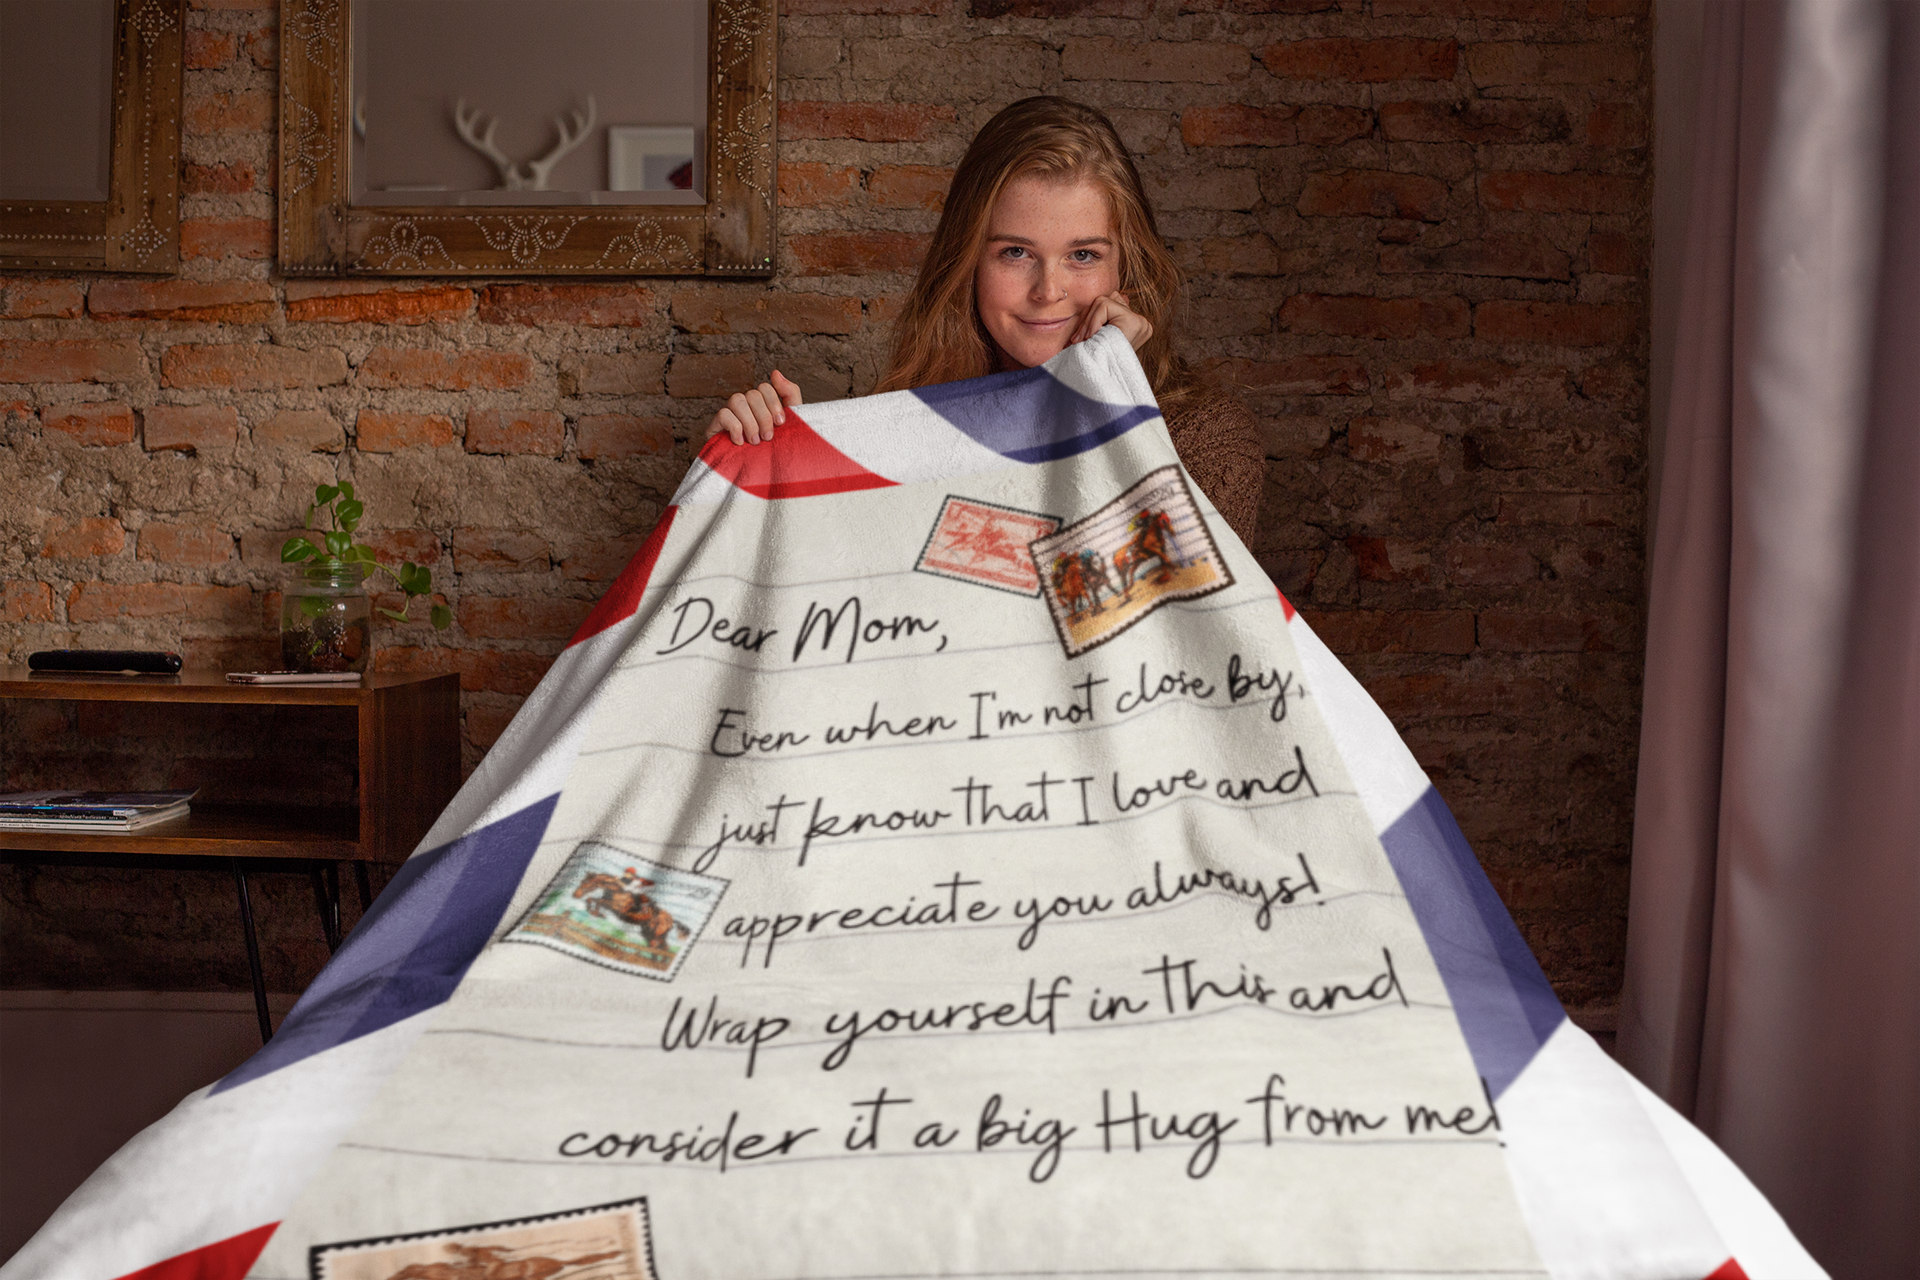 Mom Blankets from Daughter, Birthday Gifts for Mom from Son, Dear Mom  Blanket fo